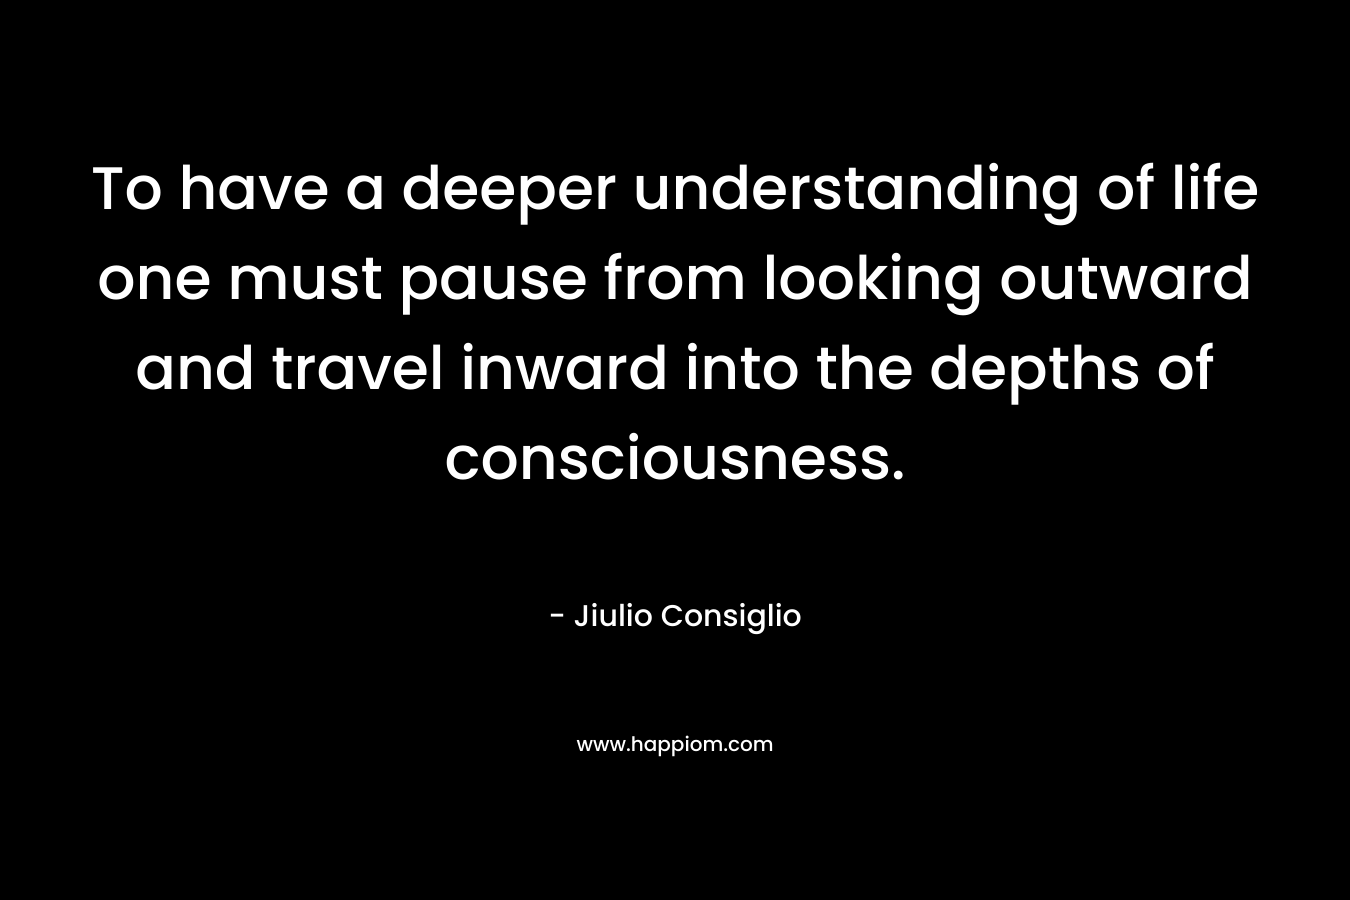 To have a deeper understanding of life one must pause from looking outward and travel inward into the depths of consciousness. – Jiulio Consiglio